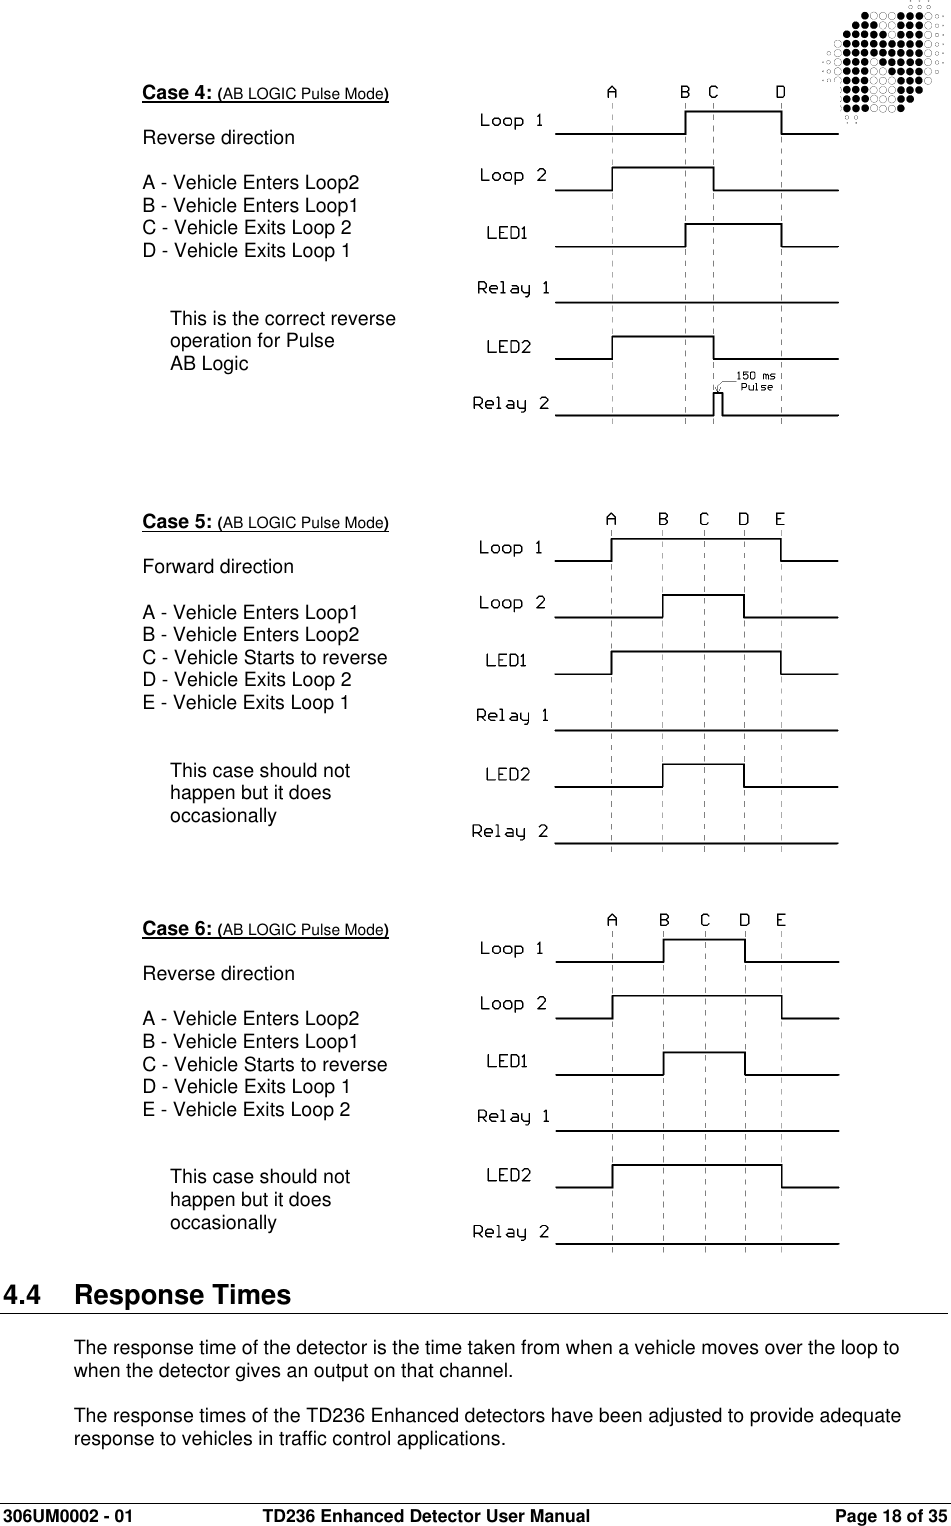  306UM0002 - 01  TD236 Enhanced Detector User Manual   Page 18 of 35   Case 4: (AB LOGIC Pulse Mode)  Reverse direction  A - Vehicle Enters Loop2 B - Vehicle Enters Loop1 C - Vehicle Exits Loop 2 D - Vehicle Exits Loop 1   This is the correct reverse operation for Pulse AB Logic       Case 5: (AB LOGIC Pulse Mode)  Forward direction  A - Vehicle Enters Loop1 B - Vehicle Enters Loop2 C - Vehicle Starts to reverse D - Vehicle Exits Loop 2 E - Vehicle Exits Loop 1   This case should not  happen but it does  occasionally     Case 6: (AB LOGIC Pulse Mode)  Reverse direction  A - Vehicle Enters Loop2 B - Vehicle Enters Loop1 C - Vehicle Starts to reverse D - Vehicle Exits Loop 1 E - Vehicle Exits Loop 2   This case should not  happen but it does  occasionally   4.4  Response Times  The response time of the detector is the time taken from when a vehicle moves over the loop to when the detector gives an output on that channel.    The response times of the TD236 Enhanced detectors have been adjusted to provide adequate response to vehicles in traffic control applications.  